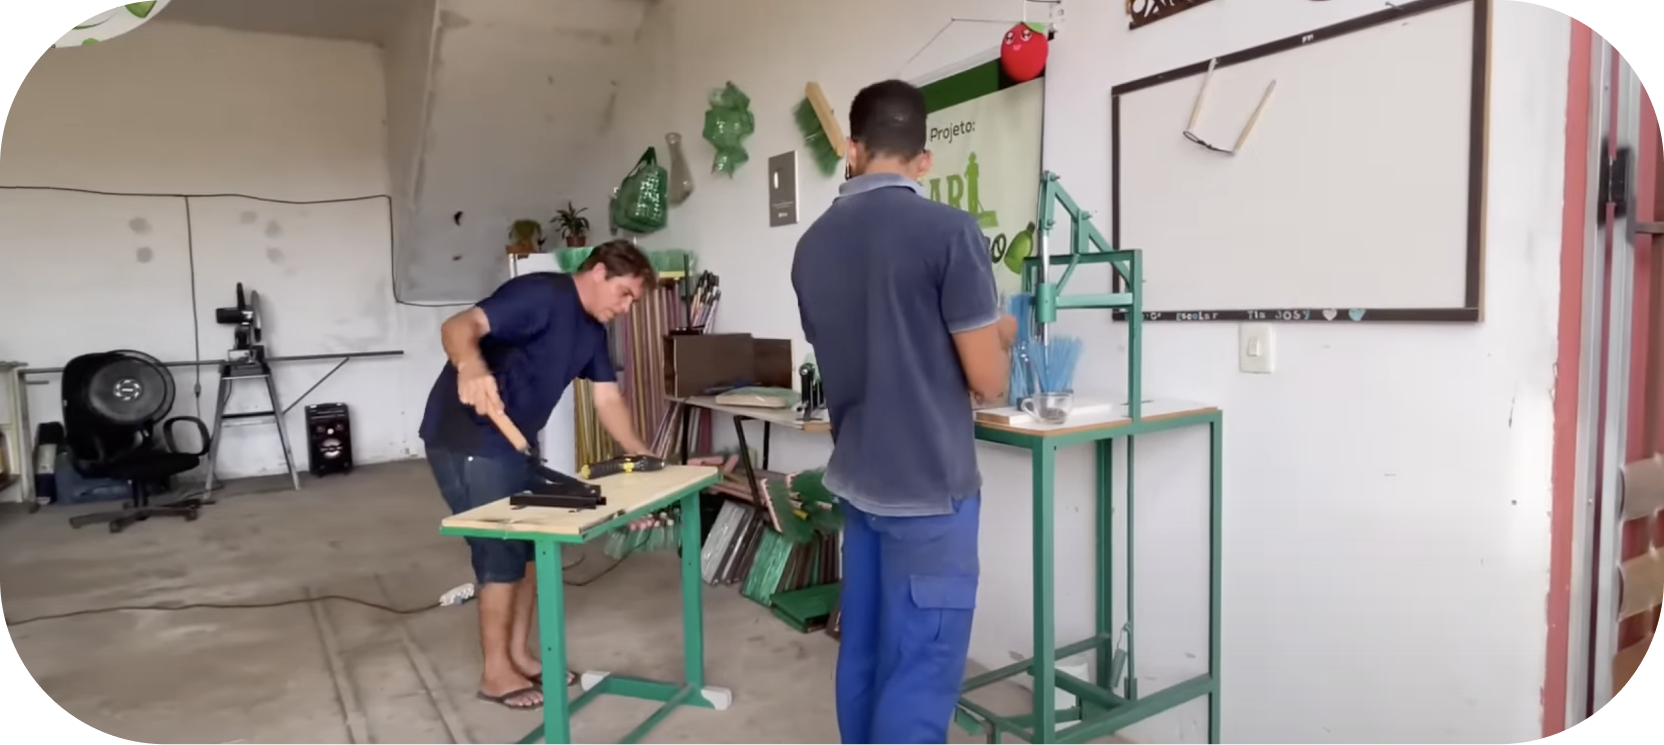 giorggio_abrantes's work shop where he recycles plastic bottles into useful brooms which is an eco-friendly business idea!